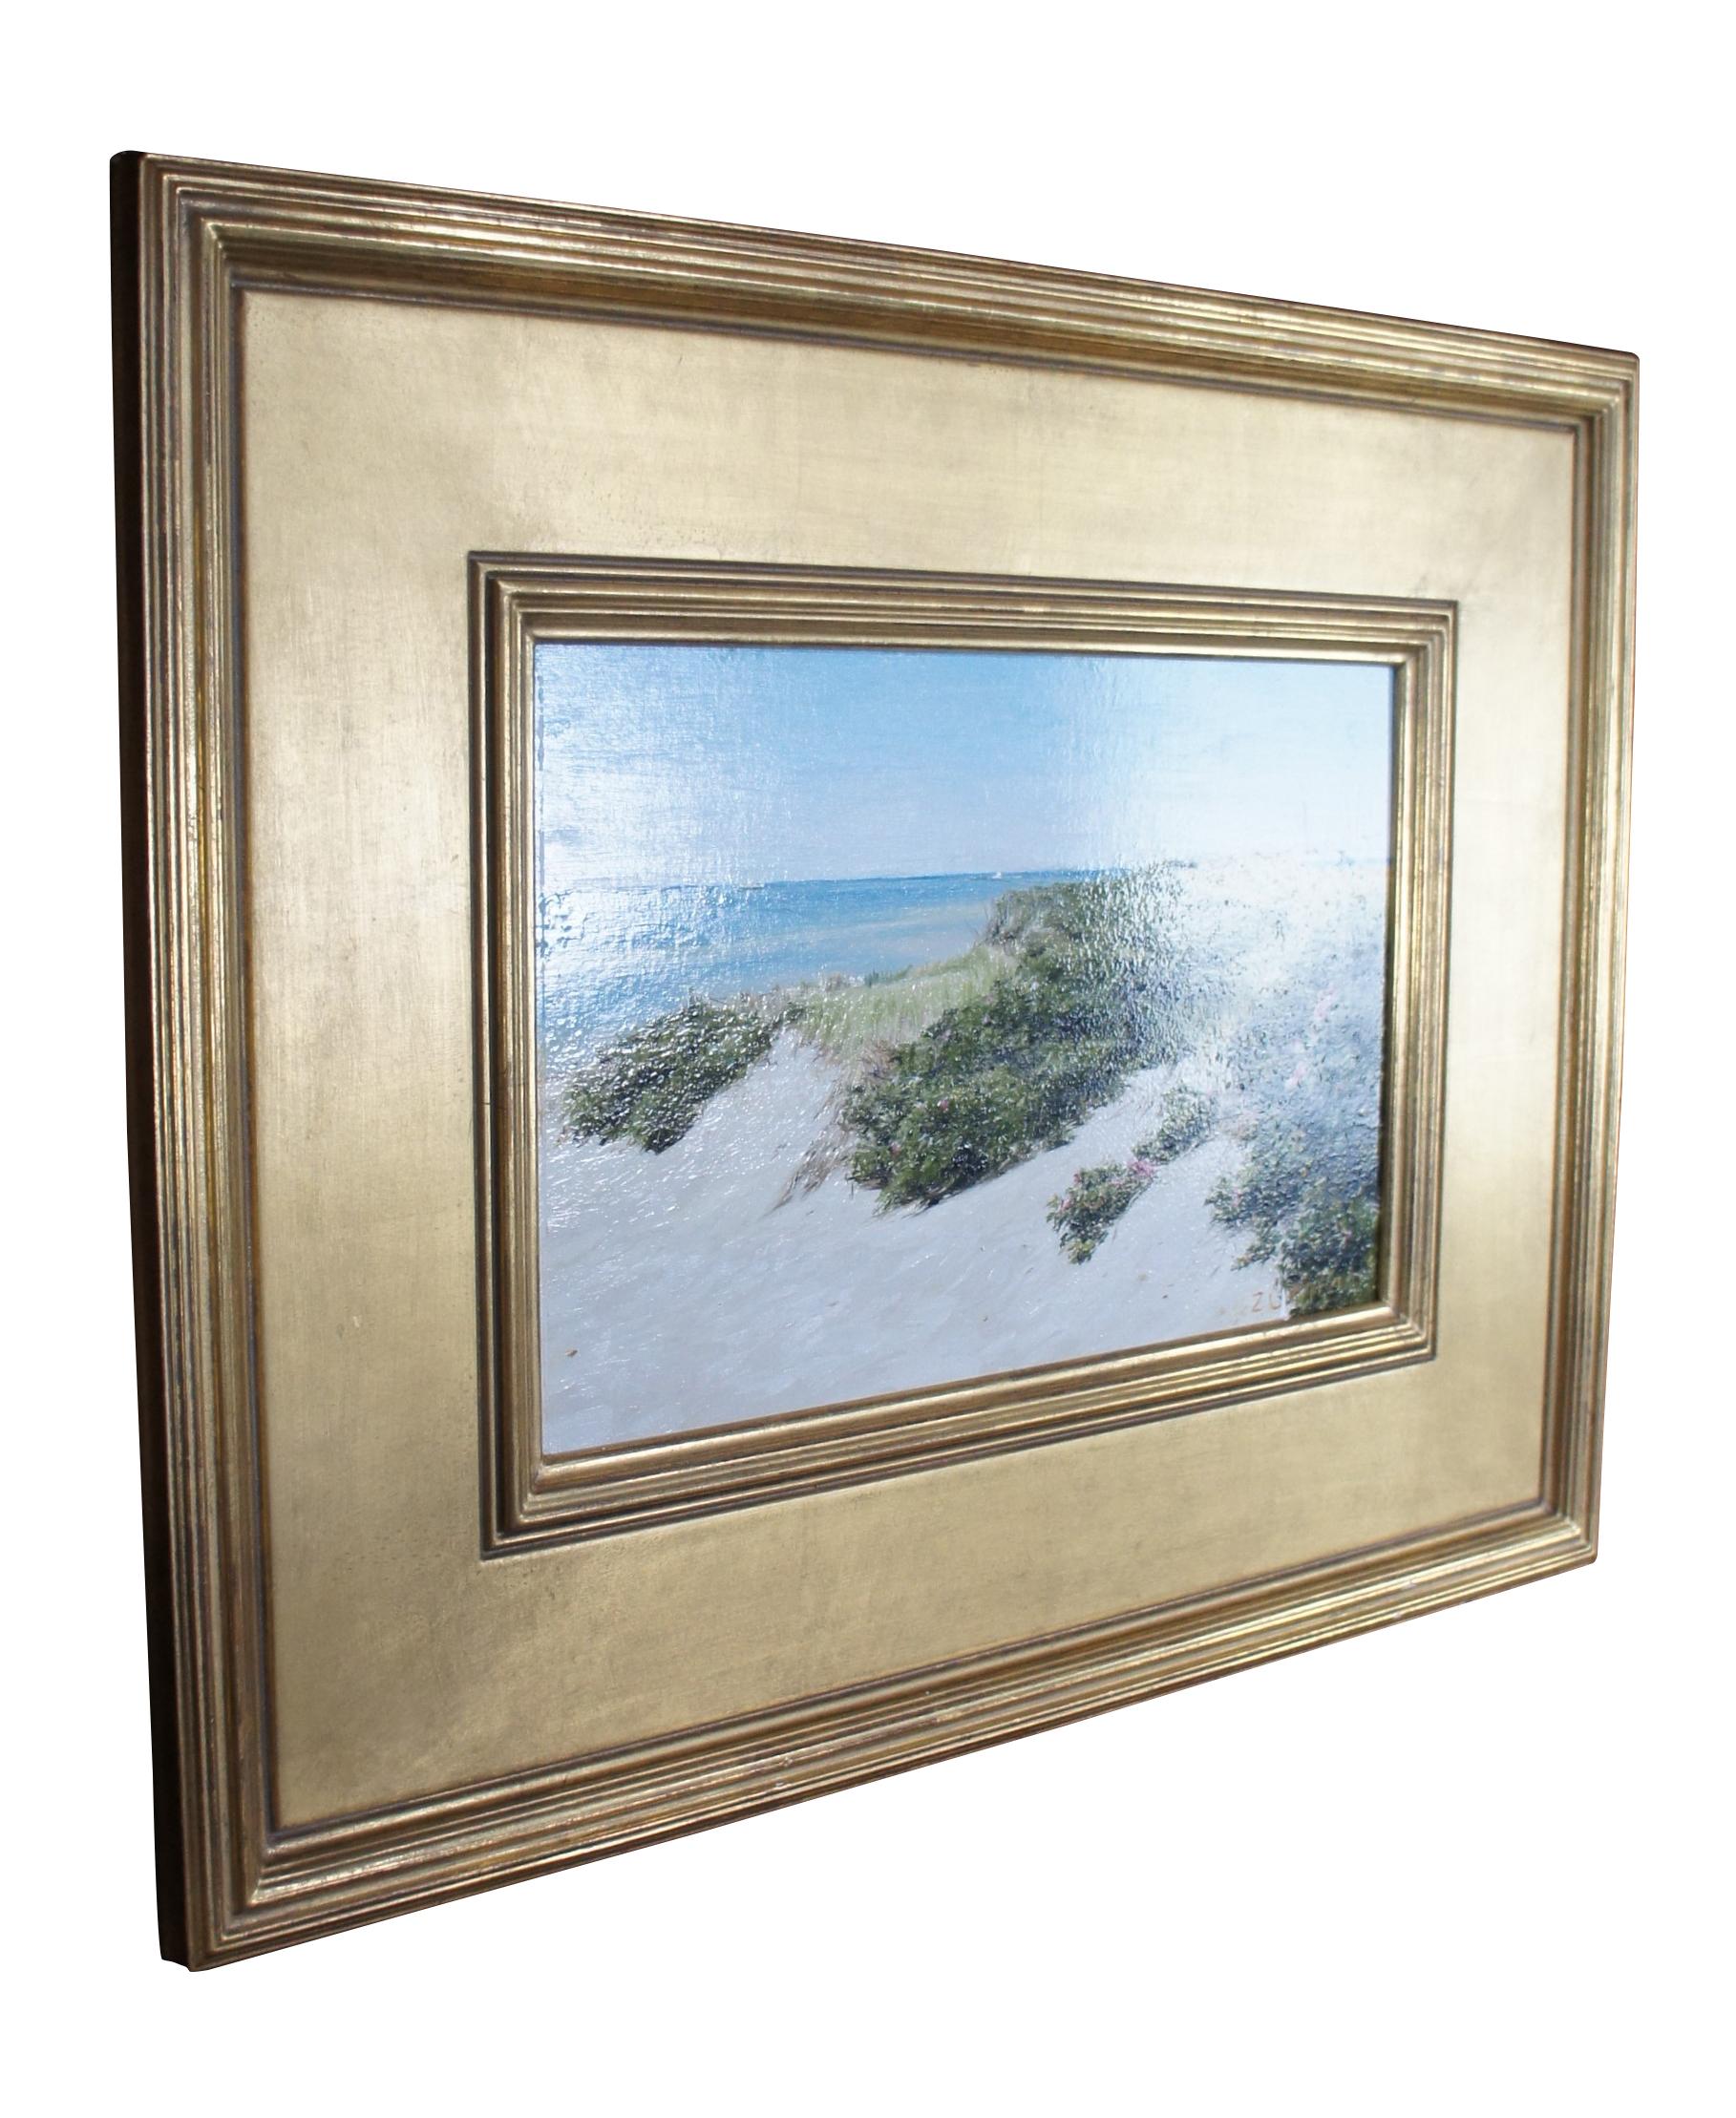 Lori Zummo Steps Beach Dunes Nantucket Seascape Oil on Board Painting In Good Condition For Sale In Dayton, OH